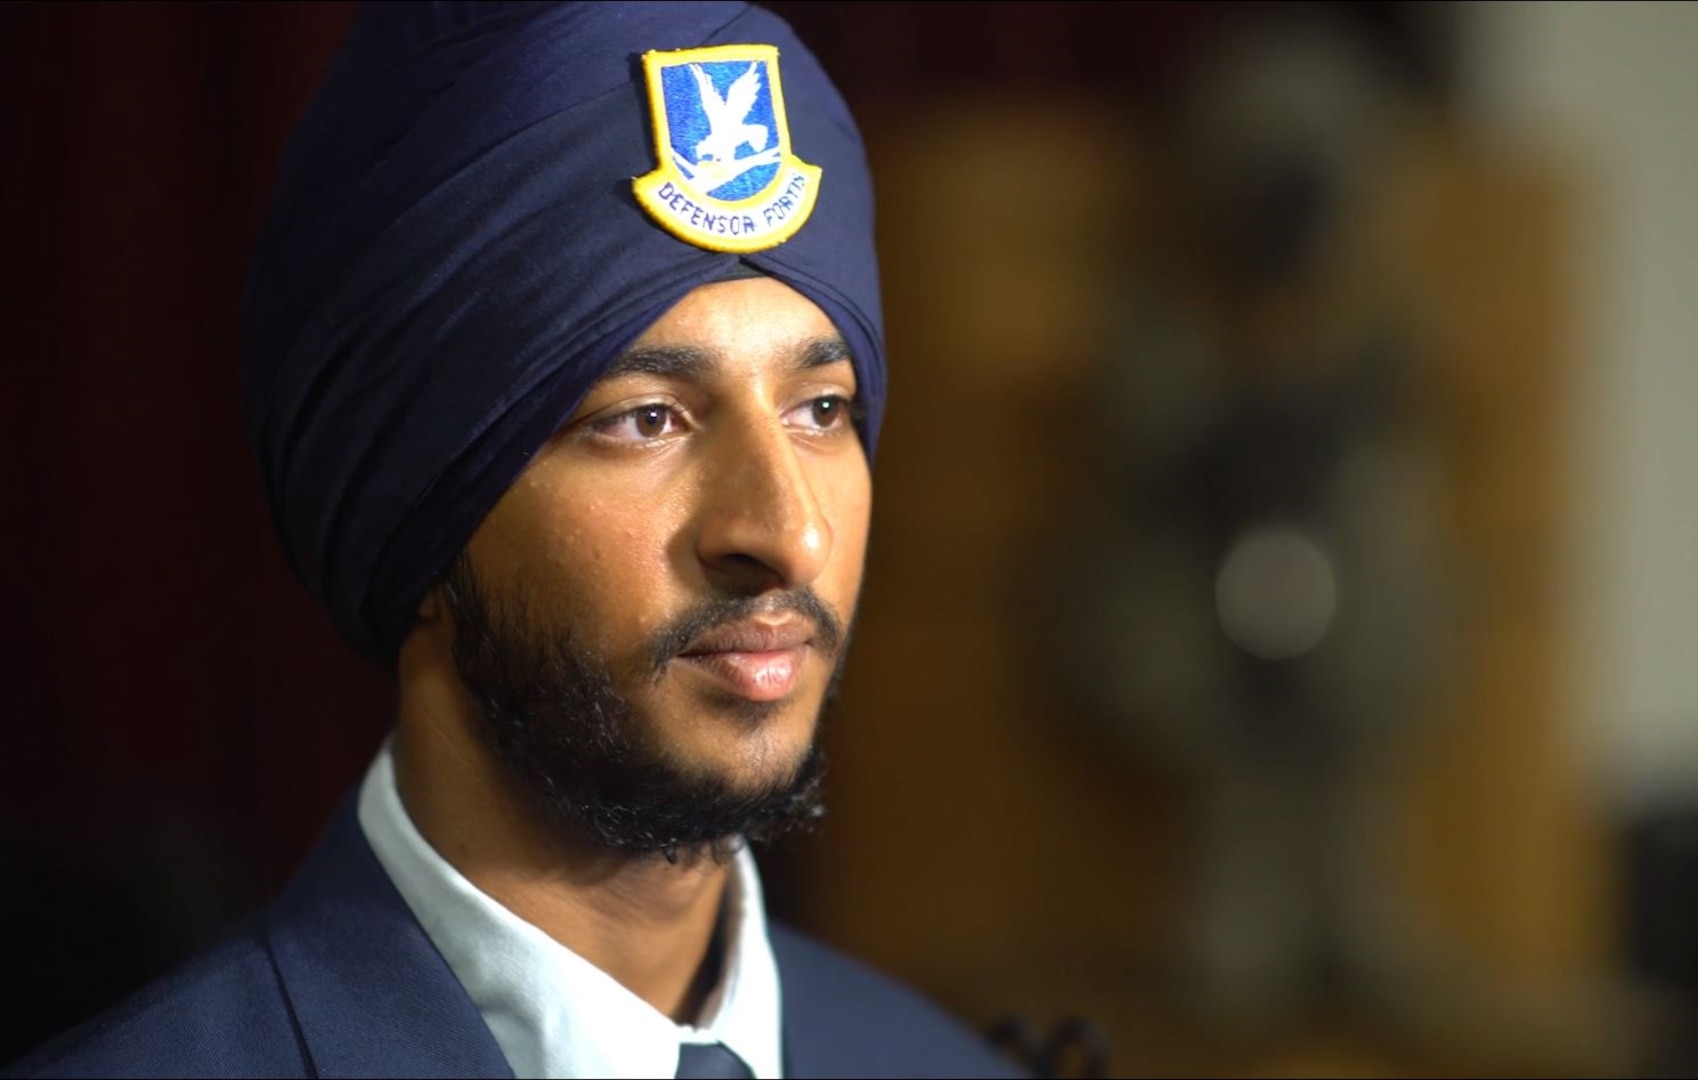 Airman 1st Class Sunjit Rathour earns his Security Forces beret as the first Sikh Airman to secure full religious accommodation, starting at Basic Military Training through Security Forces Apprentice Course, to wear a turban and remain unshaven in uniform. He graduated Security Forces technical training at Joint Base San Antonio-Lackland Sept. 26.